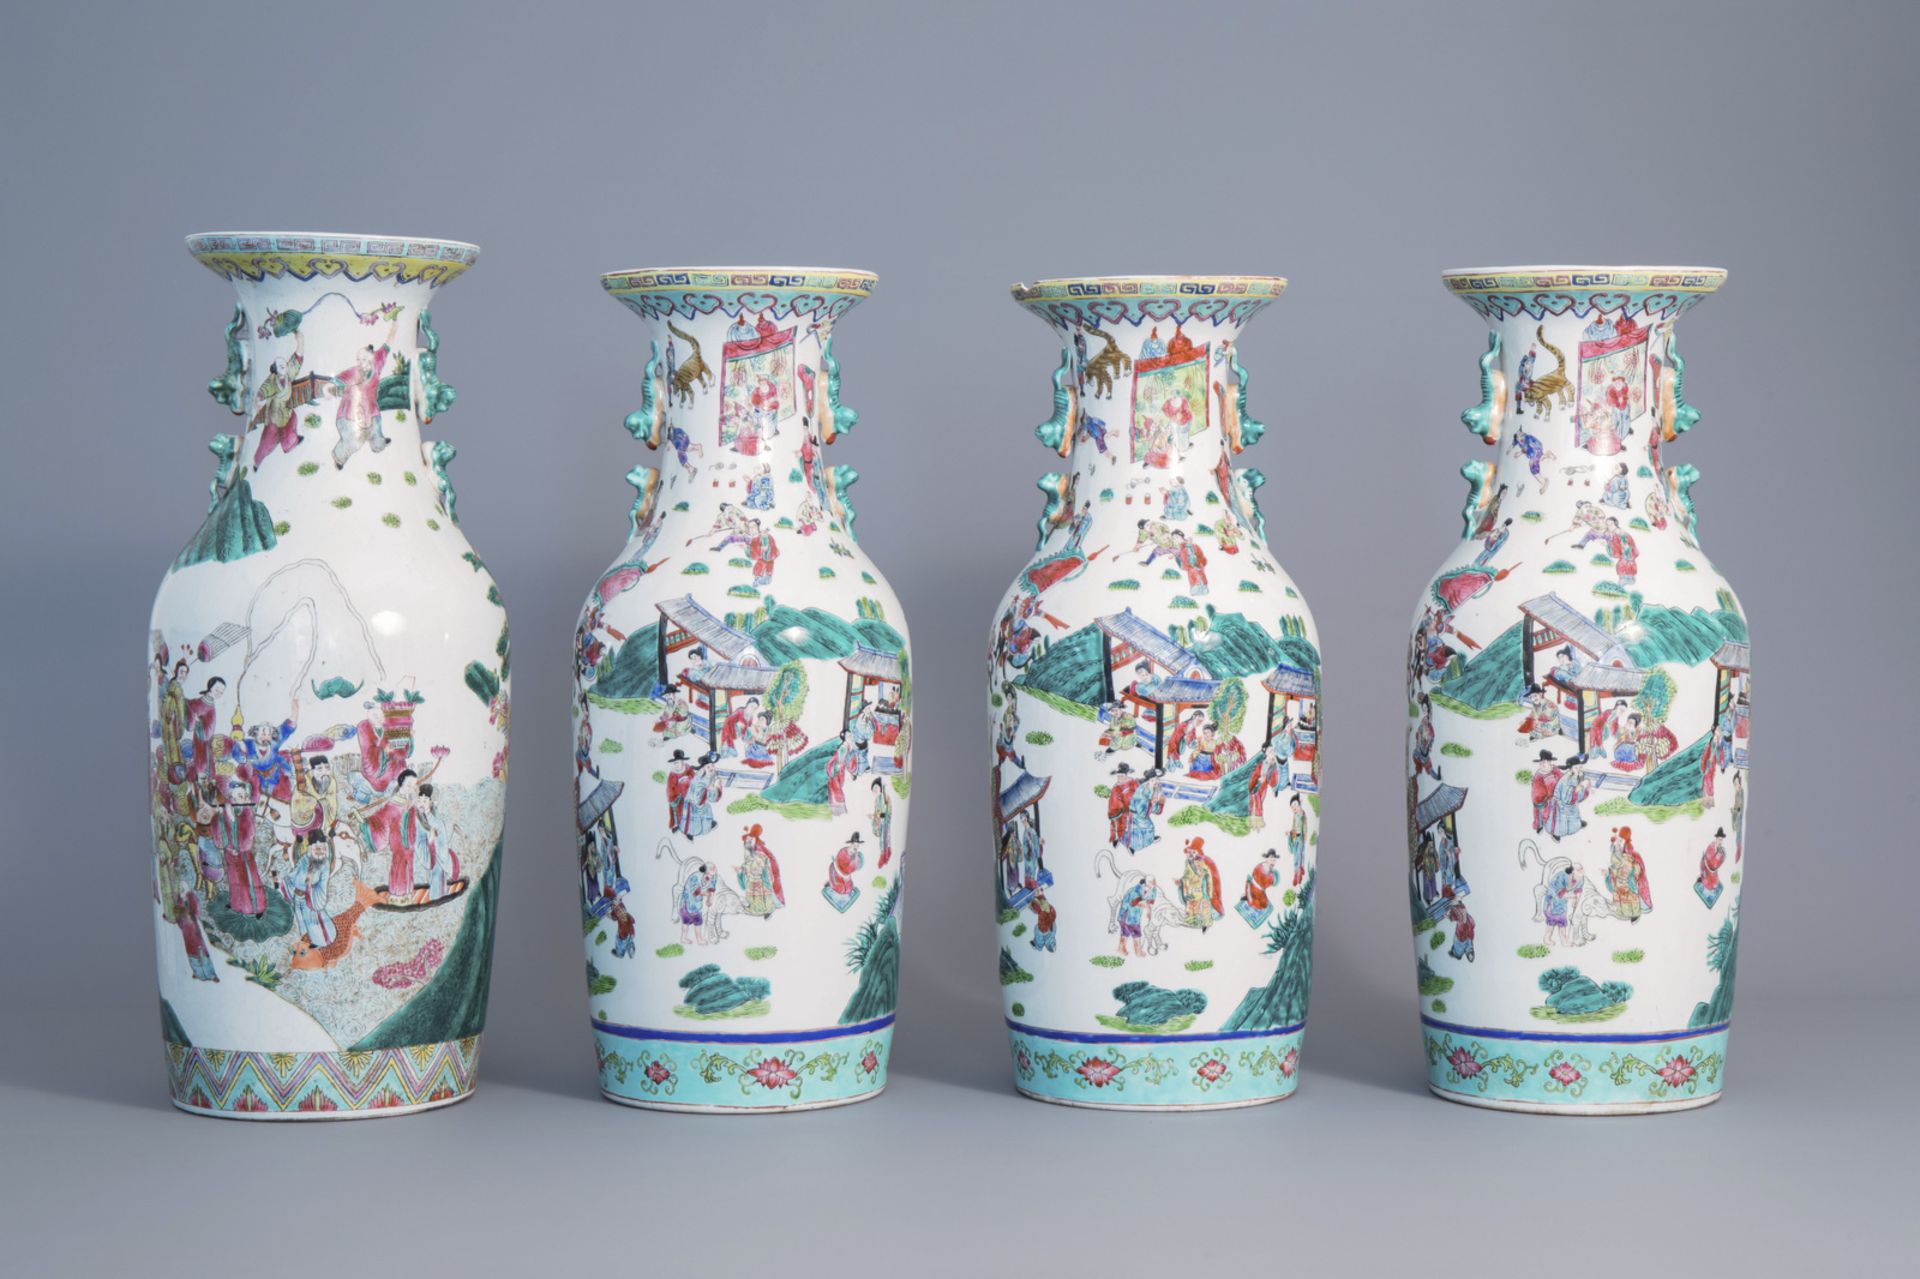 Four Chinese famille rose vases with figurative design all around, 20th C. - Image 3 of 6